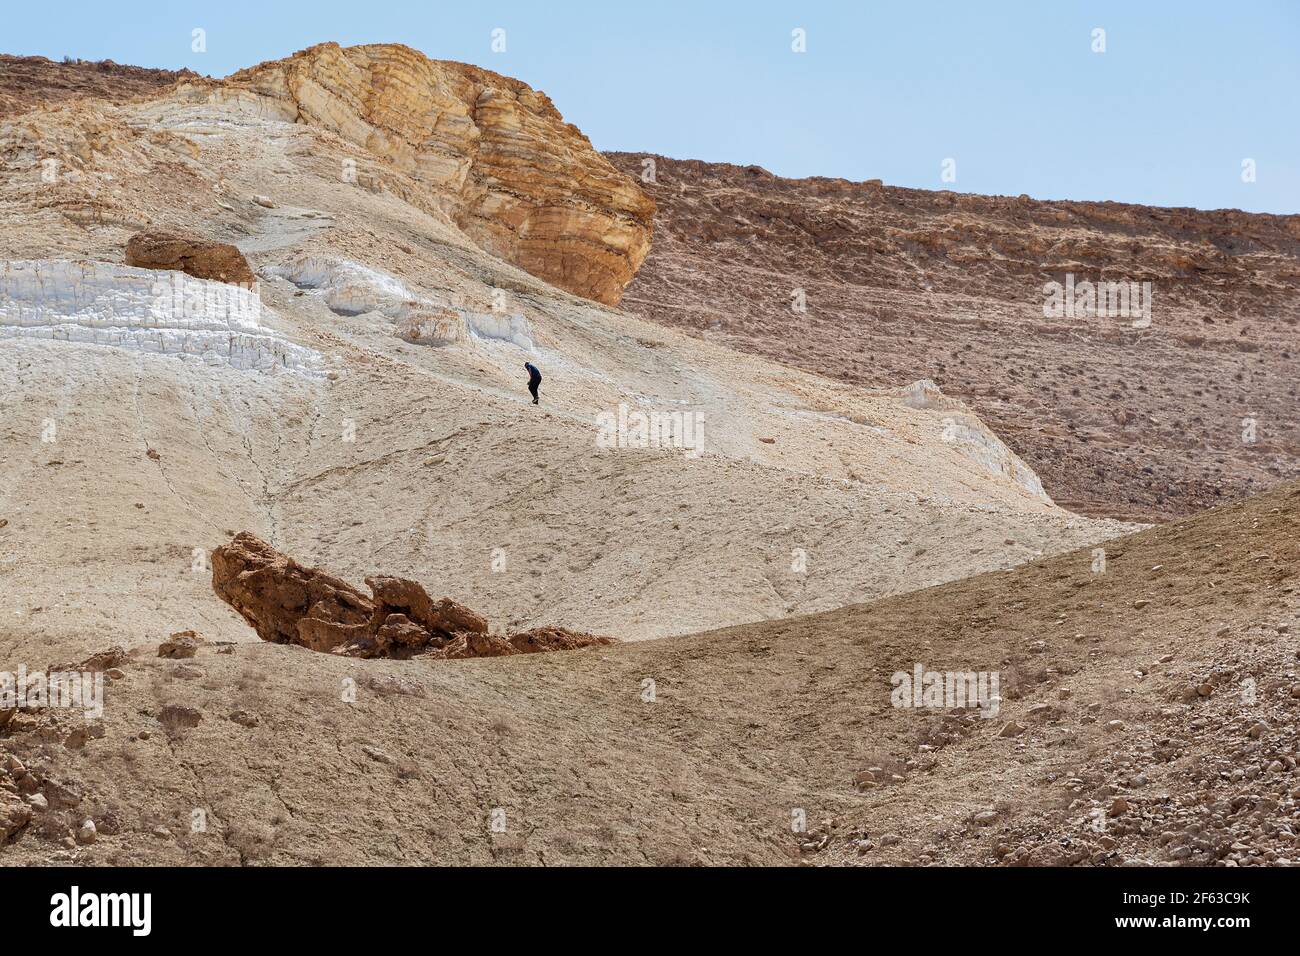 a hiker struggles up the challenging Divshon Ascent up the barren chalky limestone cliffs near Sde Boker in the Negev Desert in Israel Stock Photo